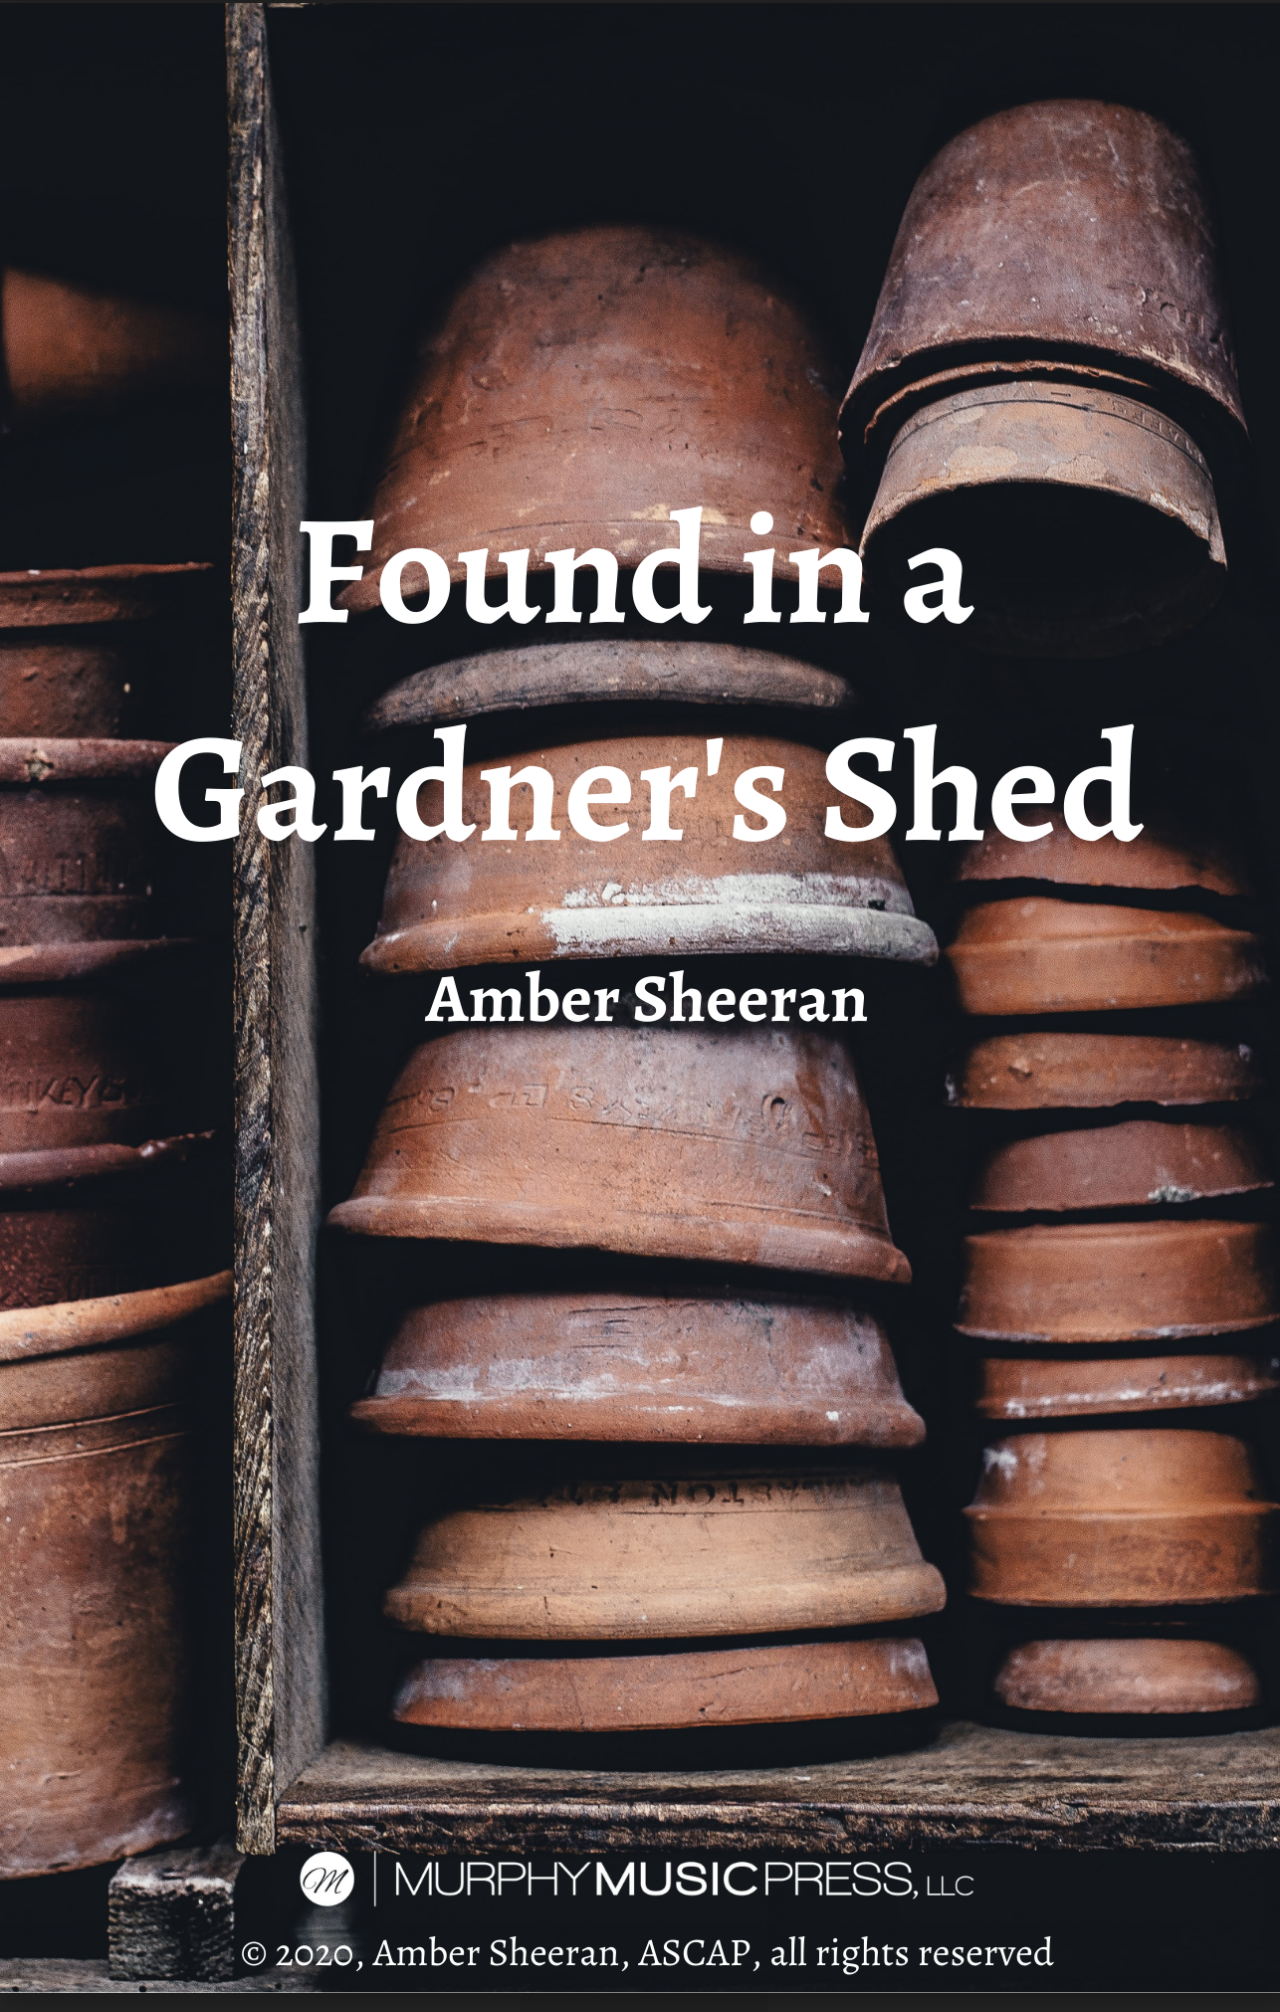 Found In A Gardener's Shed by Amber Sheeran